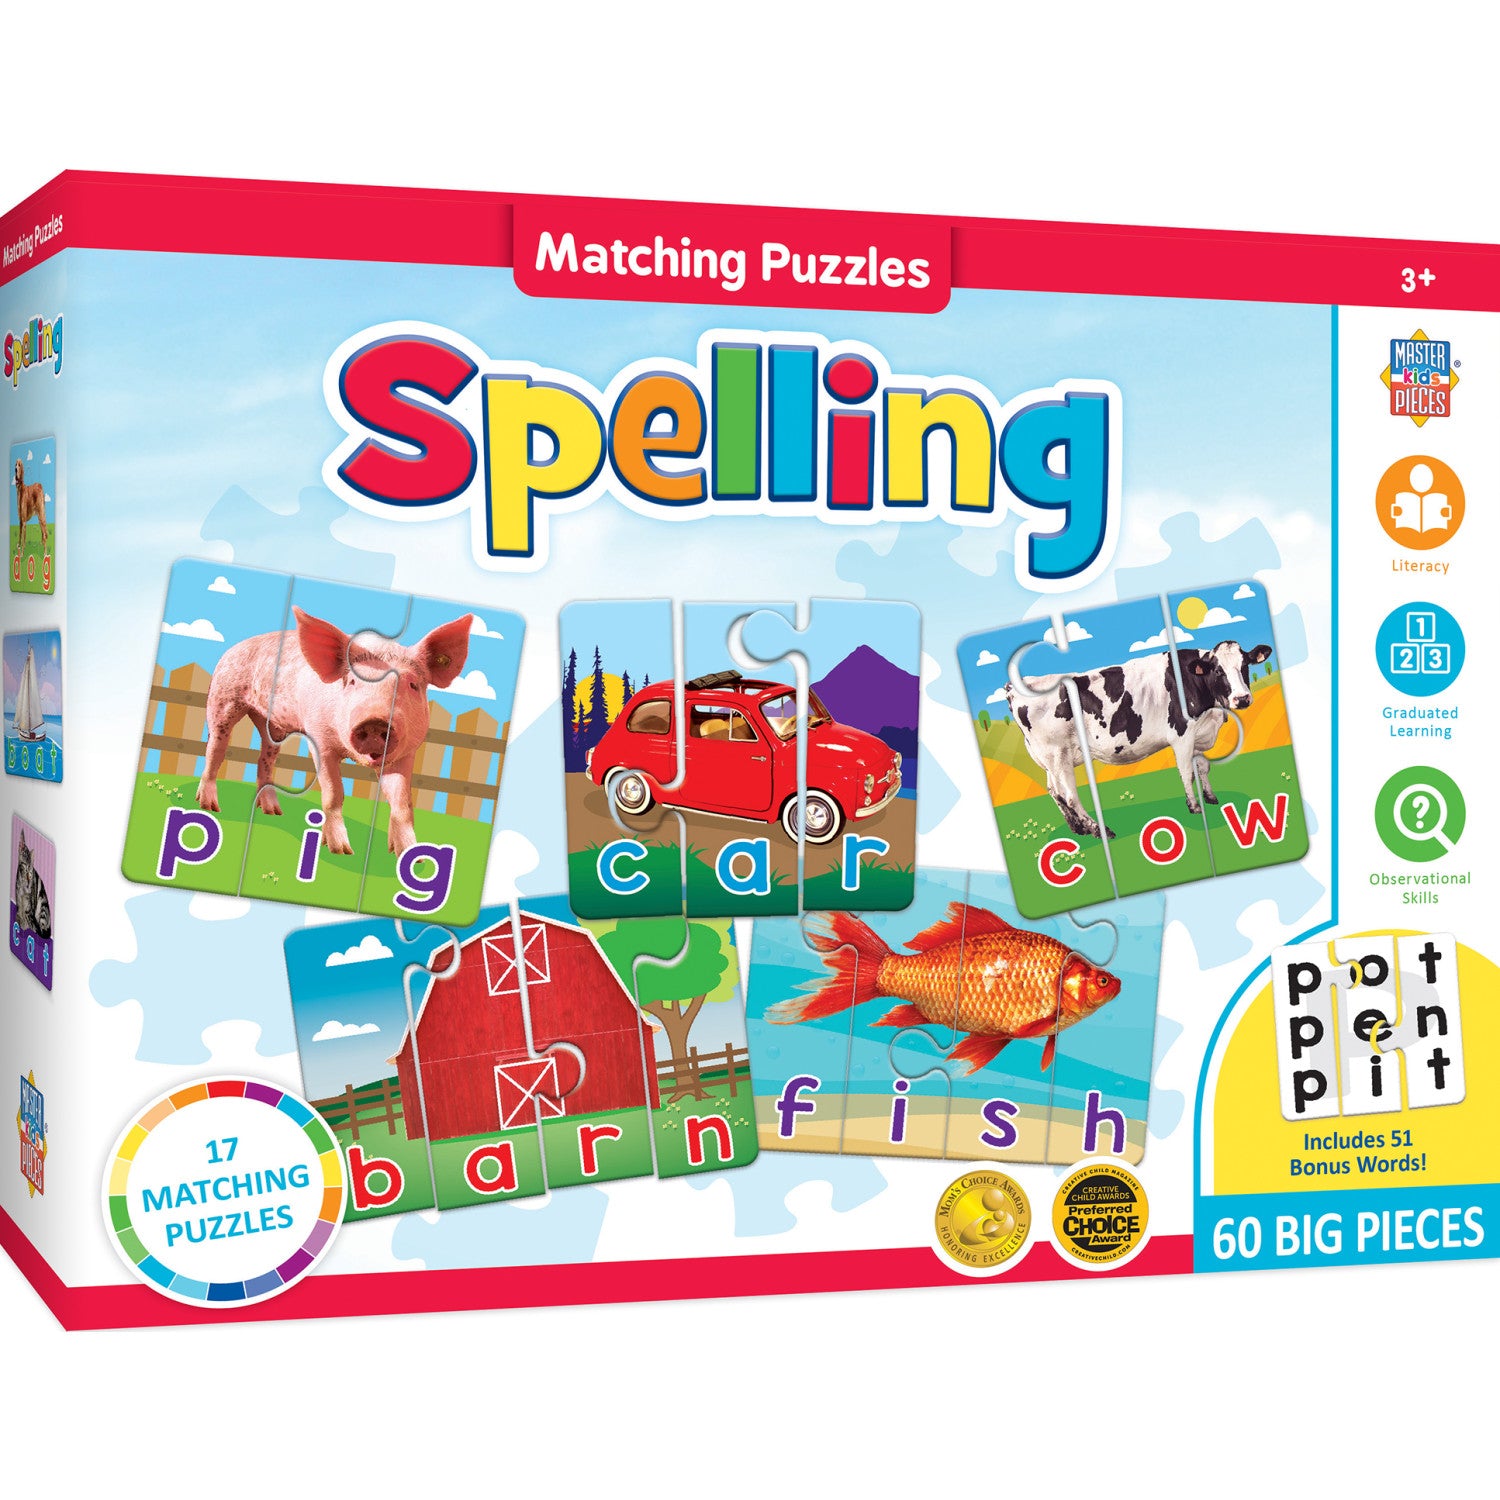 Spelling - Educational Matching Jigsaw Puzzles